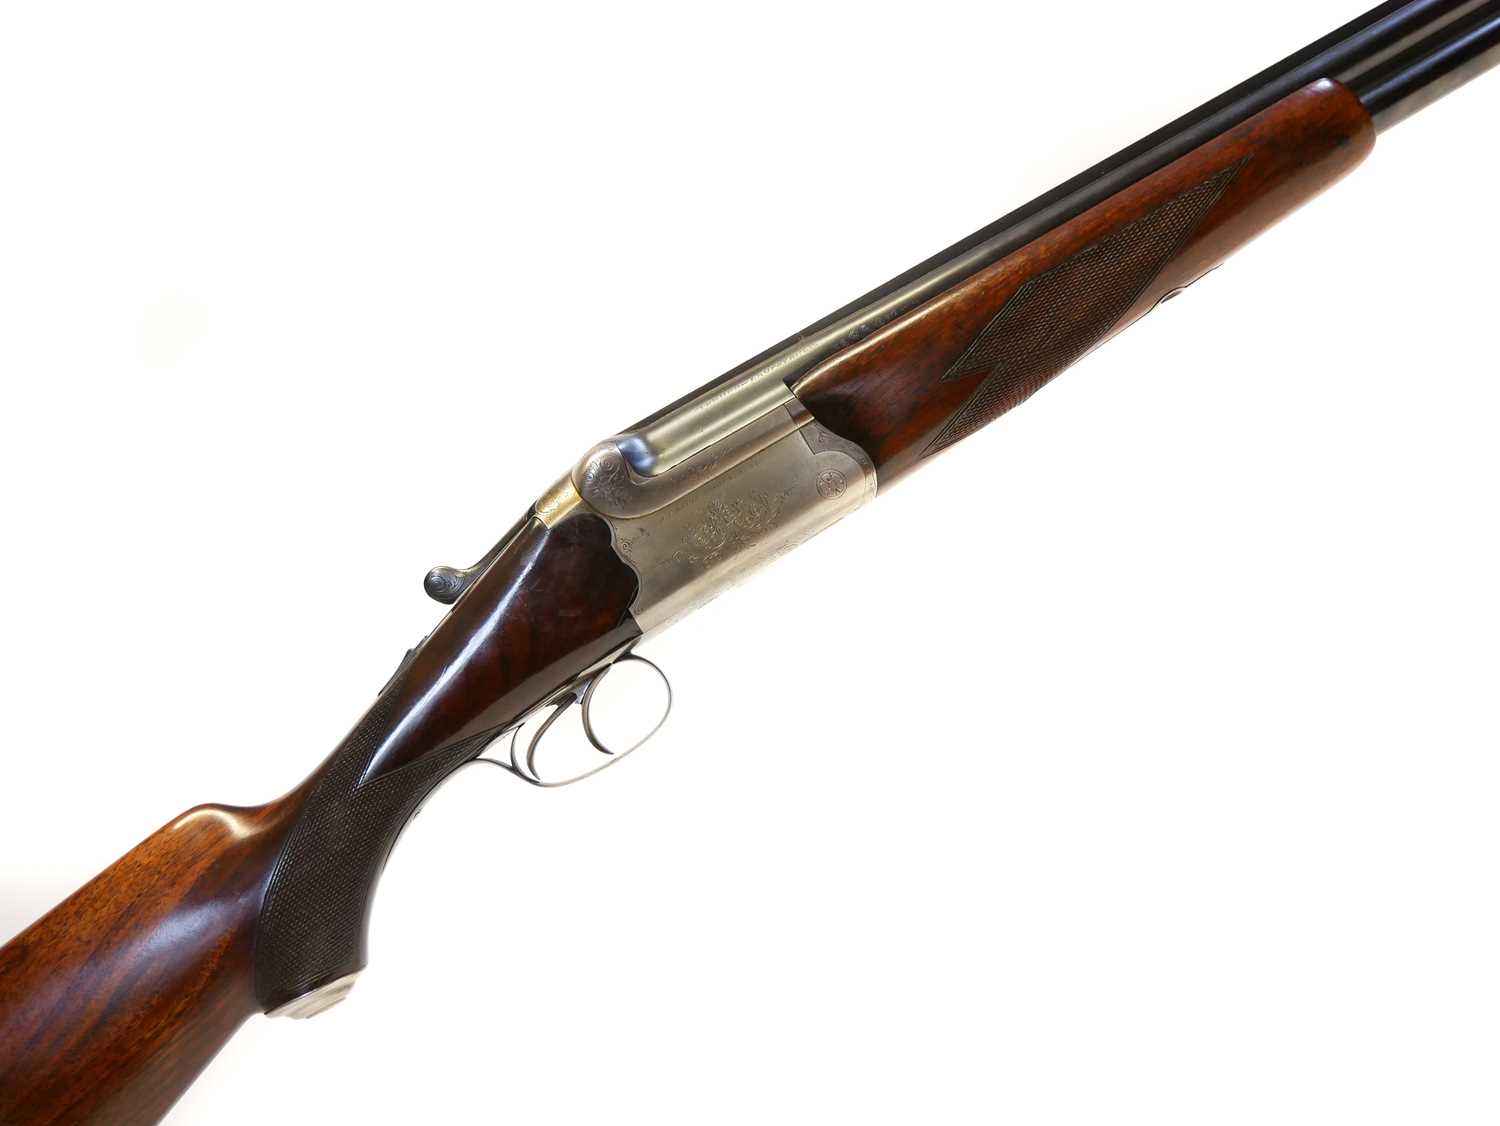 Lot 236 - J.P.Sauer 16 bore over and under shotgun LICENCE REQUIRED